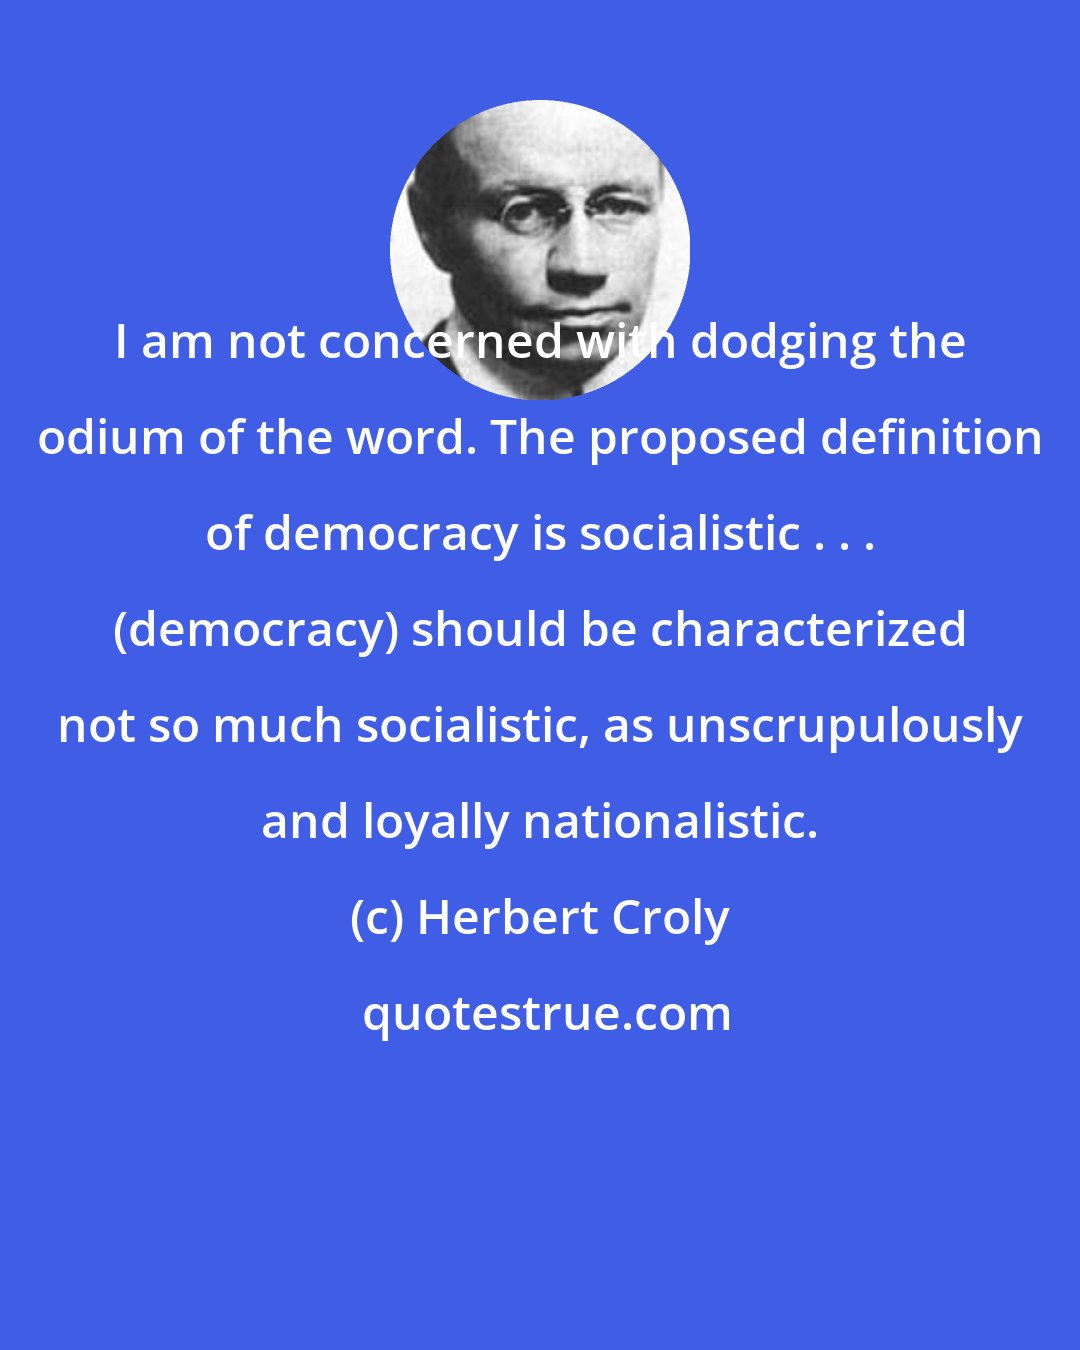 Herbert Croly: I am not concerned with dodging the odium of the word. The proposed definition of democracy is socialistic . . . (democracy) should be characterized not so much socialistic, as unscrupulously and loyally nationalistic.